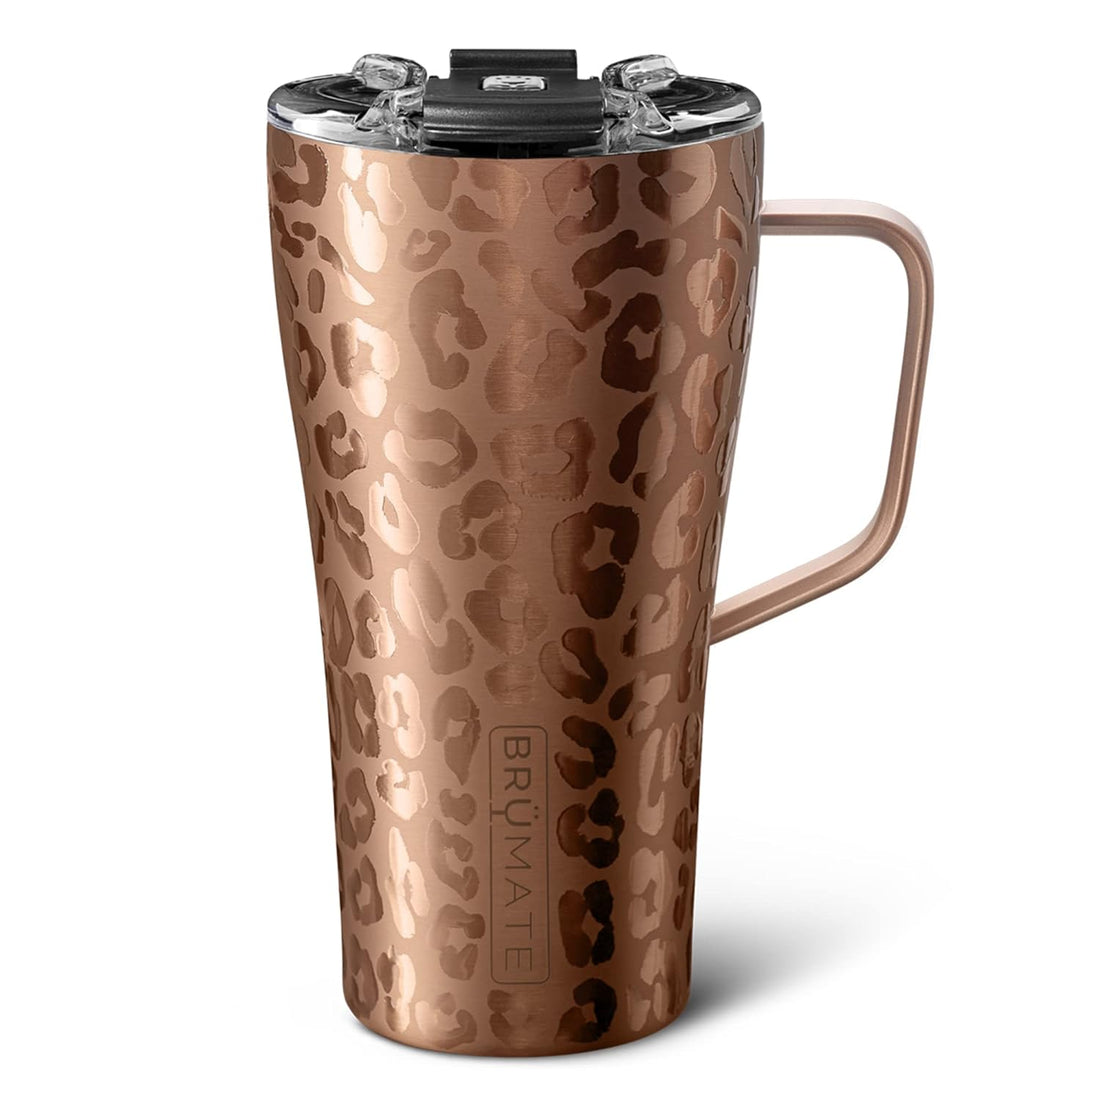 BrüMate Toddy 22oz 100% Leak Proof Insulated Coffee Mug with Handle & Lid - Stainless Steel Coffee Travel Mug - Double Walled Coffee Cup (Gold Leopard)